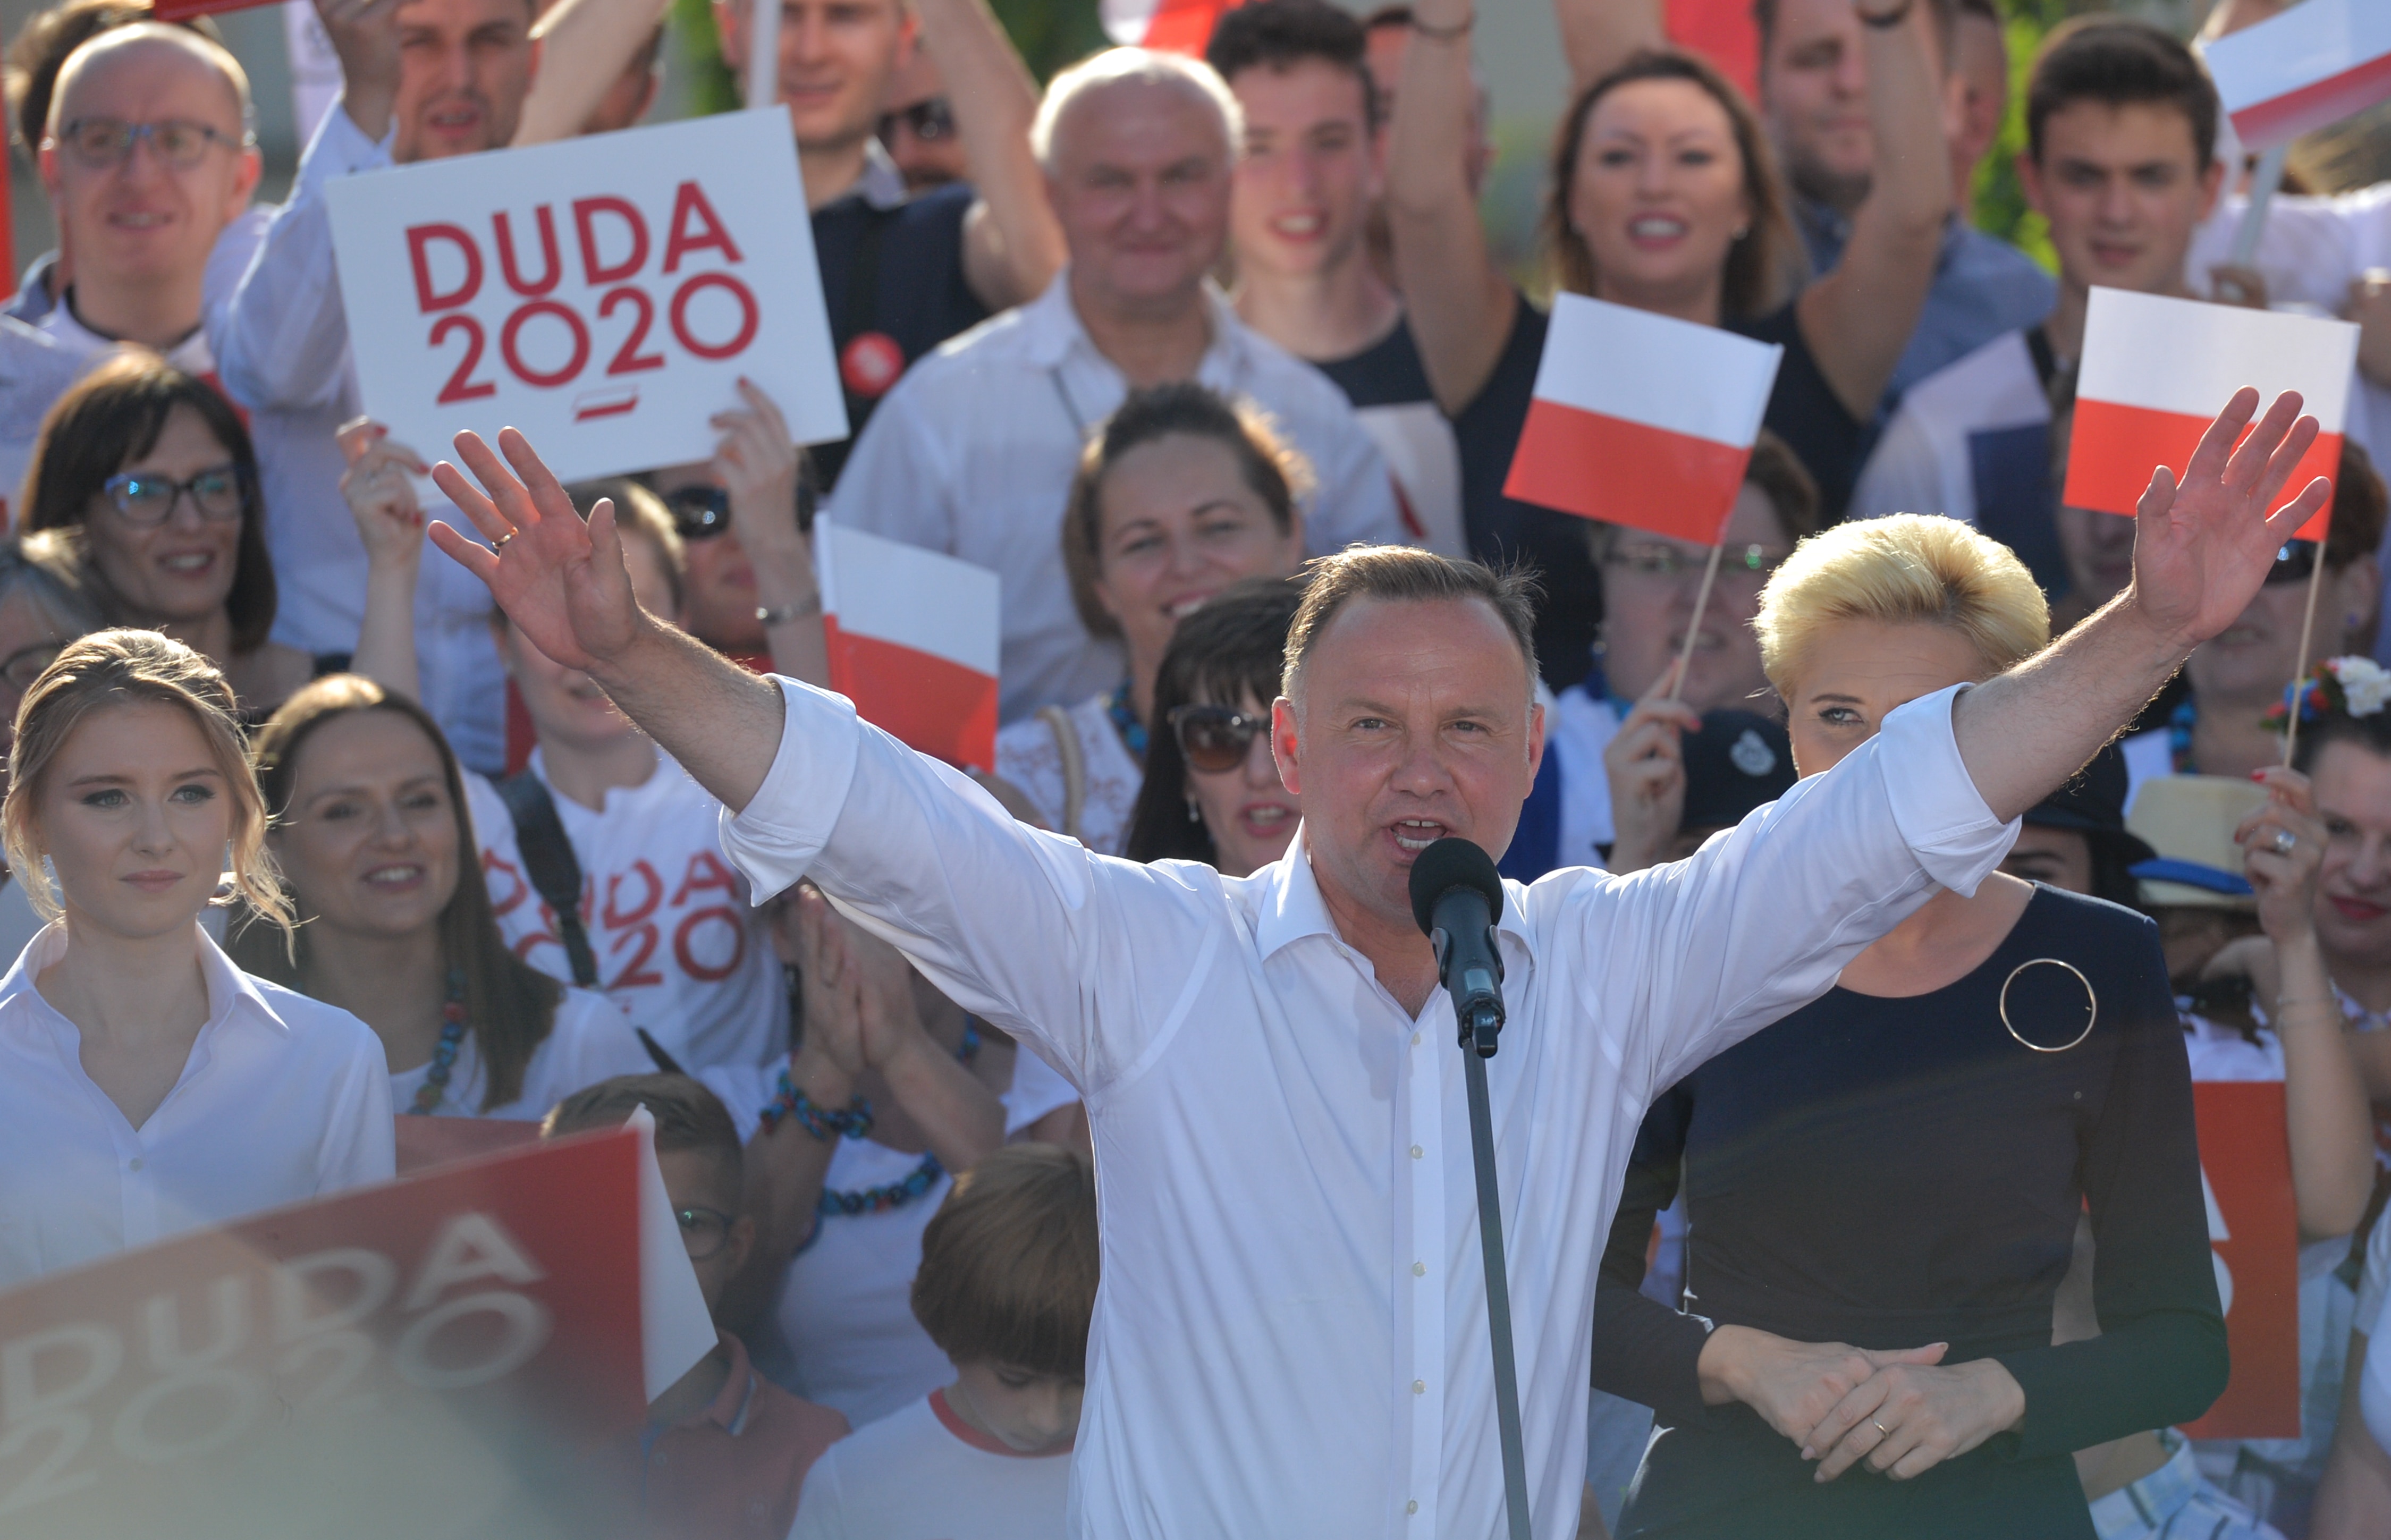 Poland election: How gay rights and homophobia have bitterly divided ...